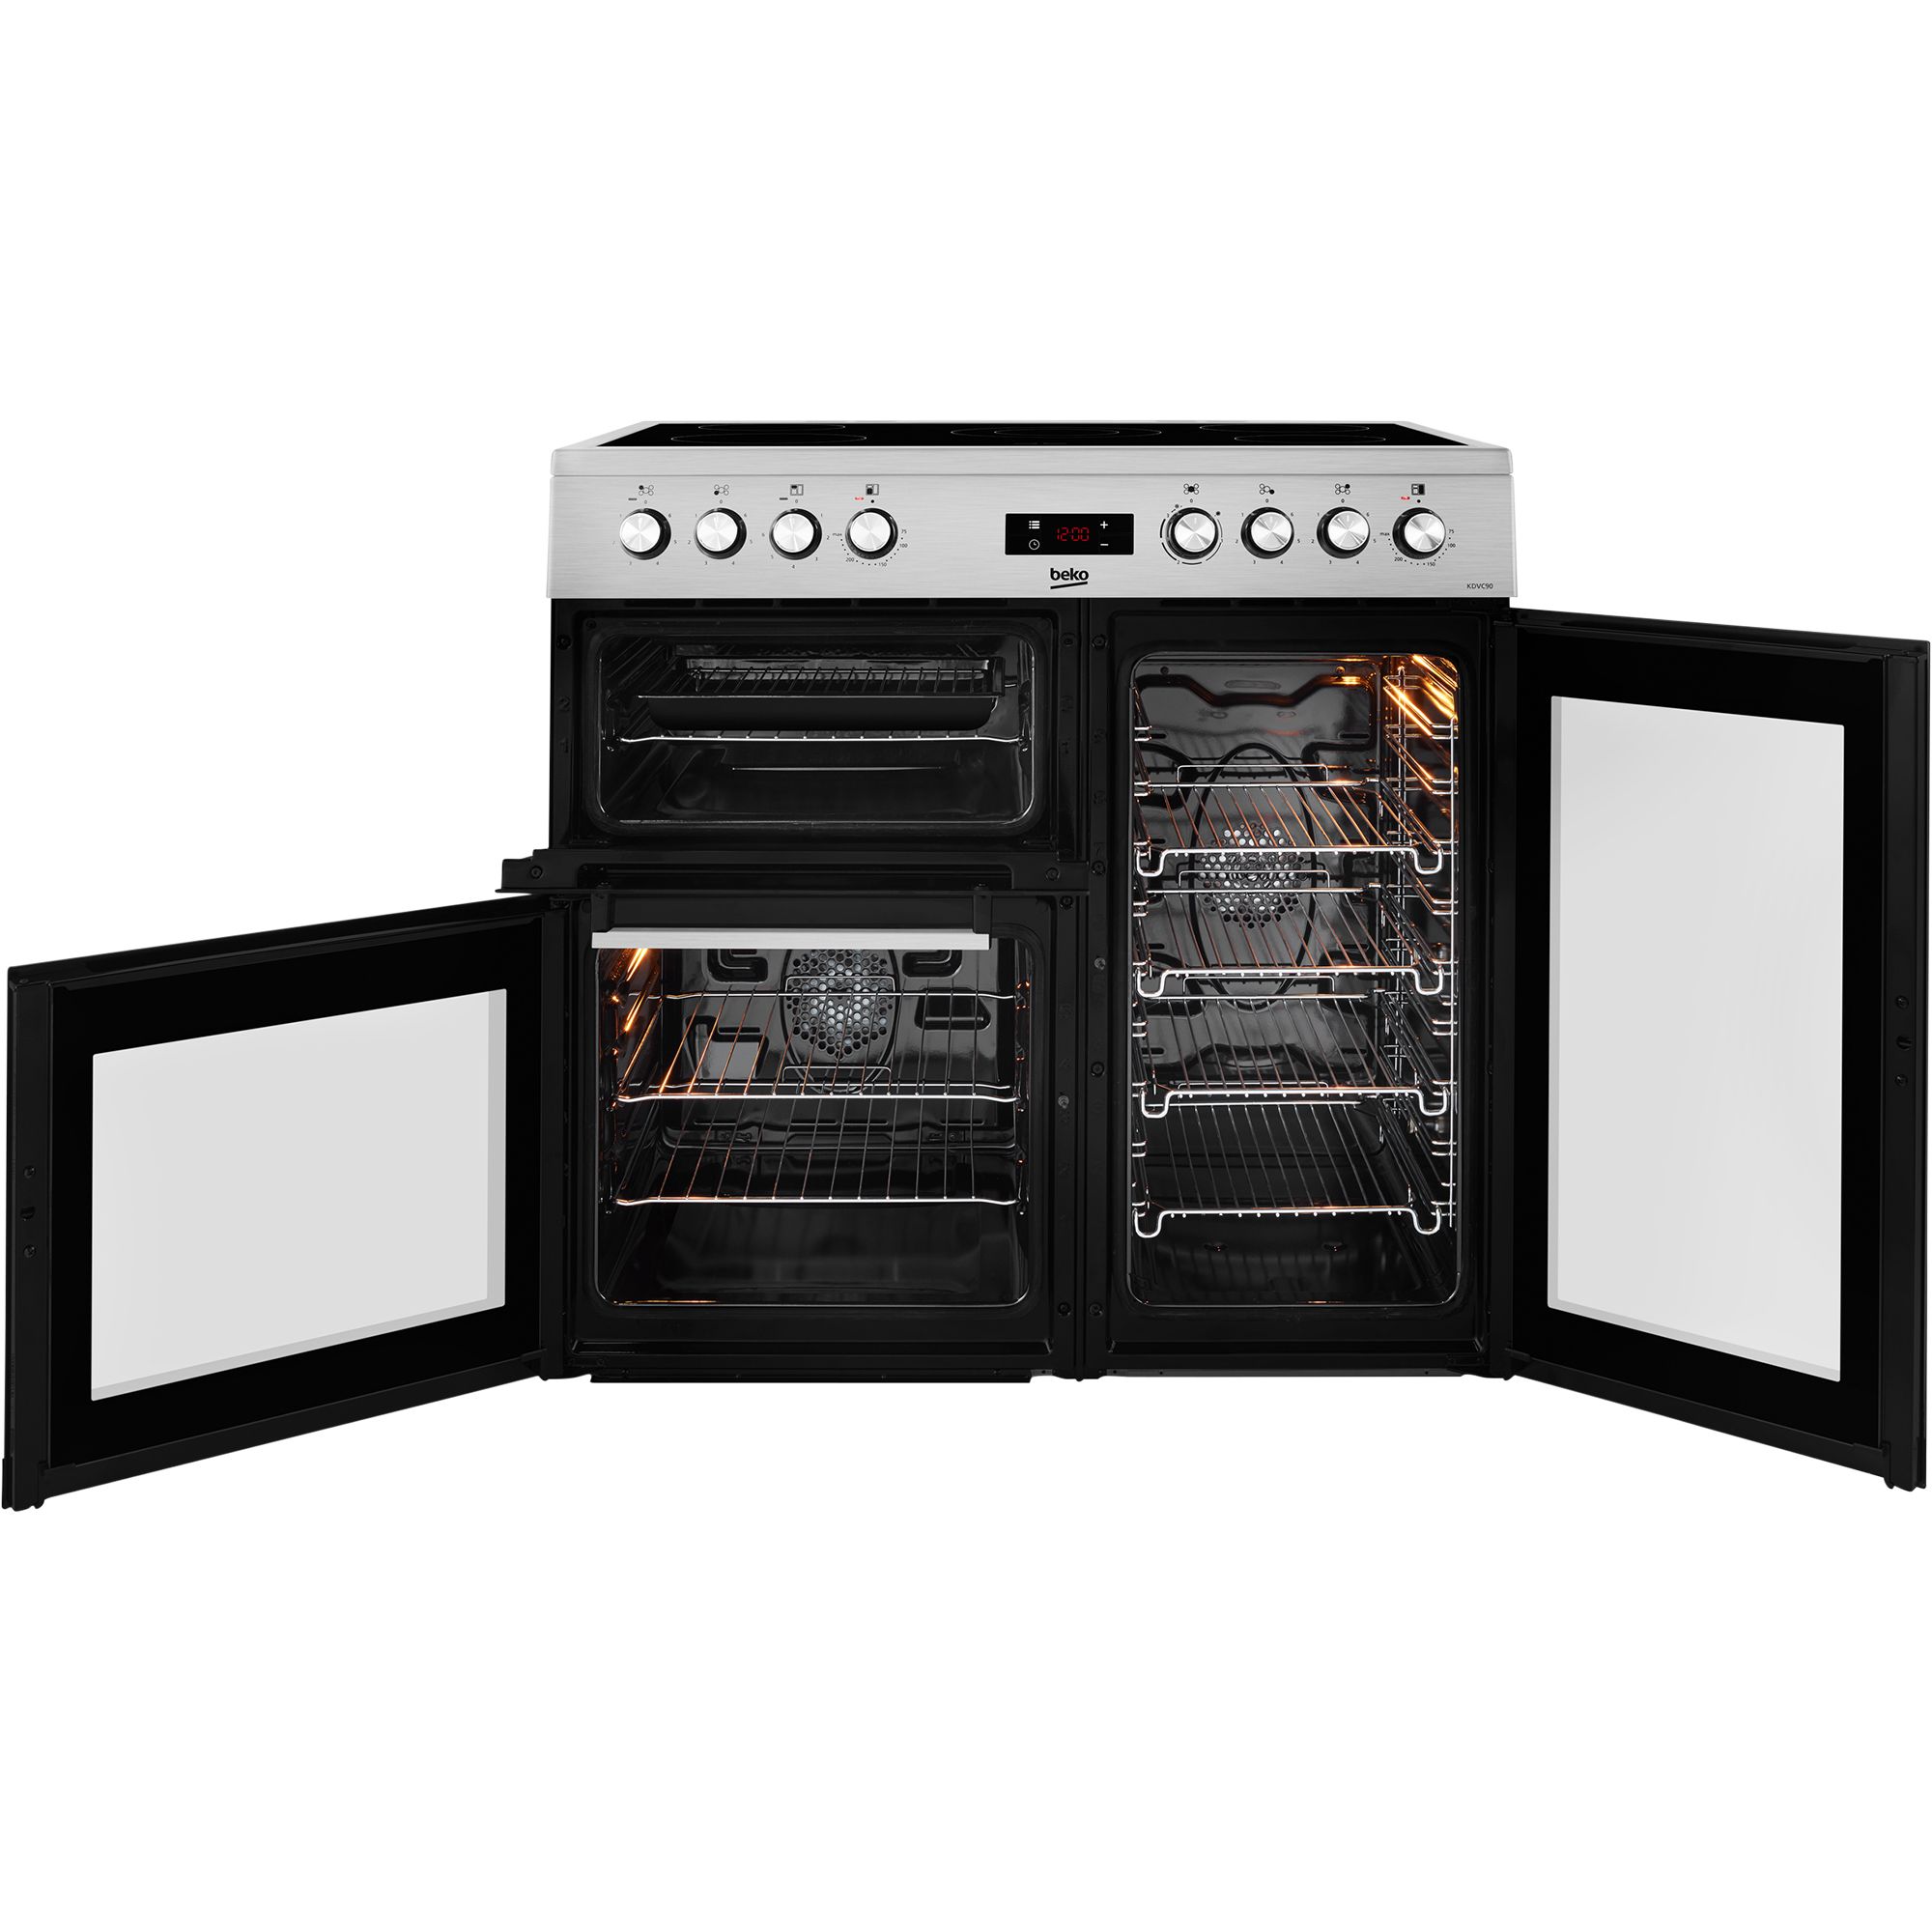 Beko KDVC90X Freestanding Electric Range cooker with Ceramic Hob - Stainless steel effect